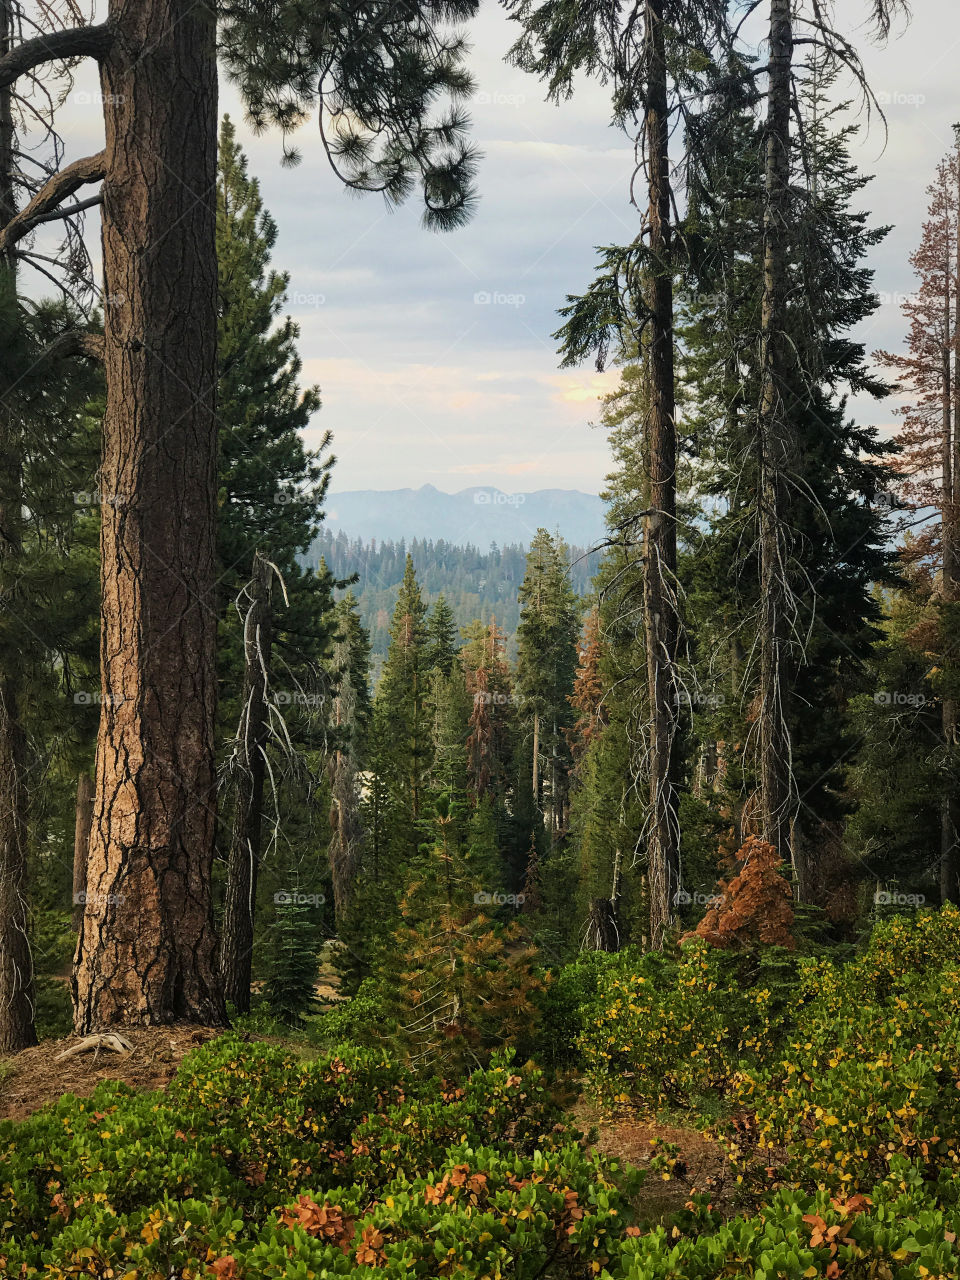 Green trees in forest near South Lake Tahoe California 